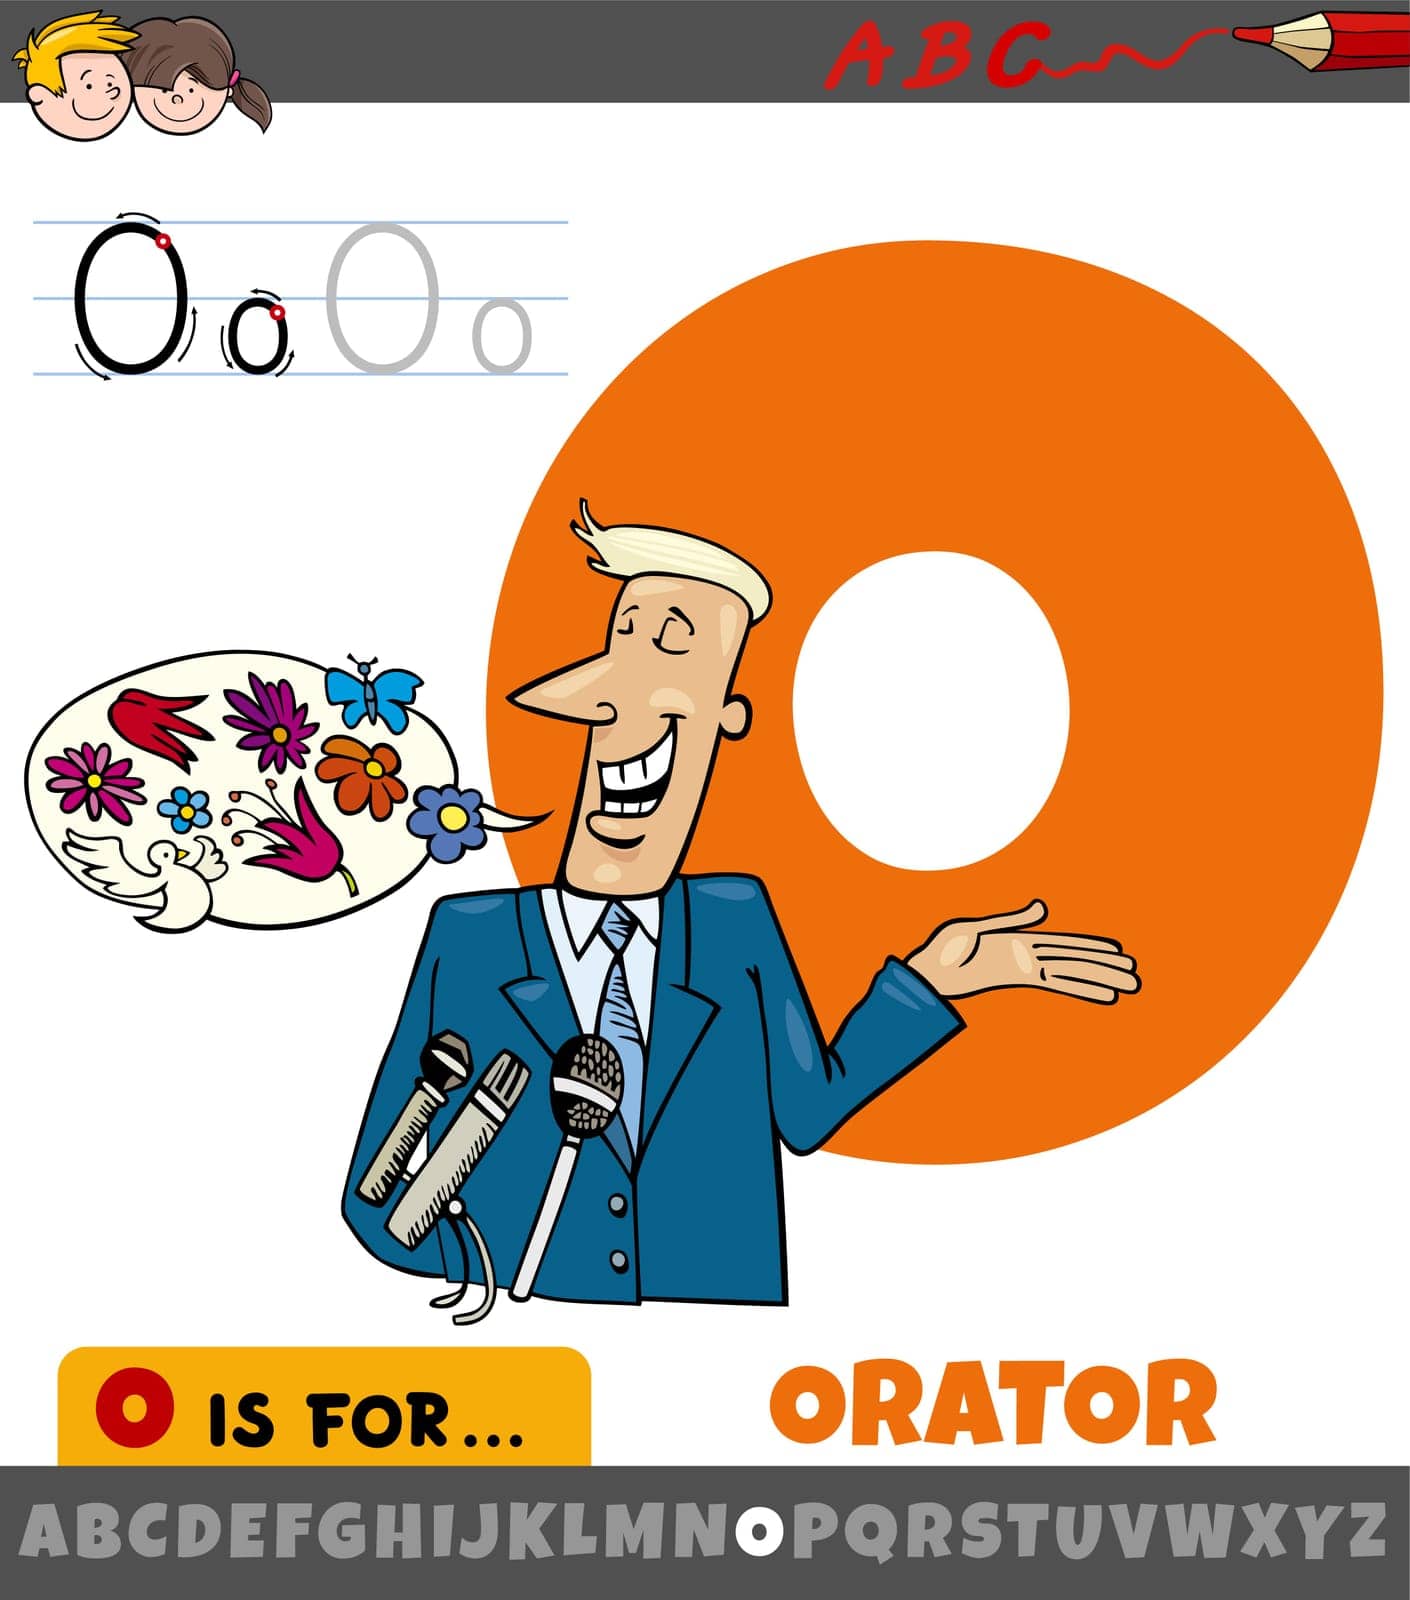 Educational cartoon illustration of letter O from alphabet with orator character